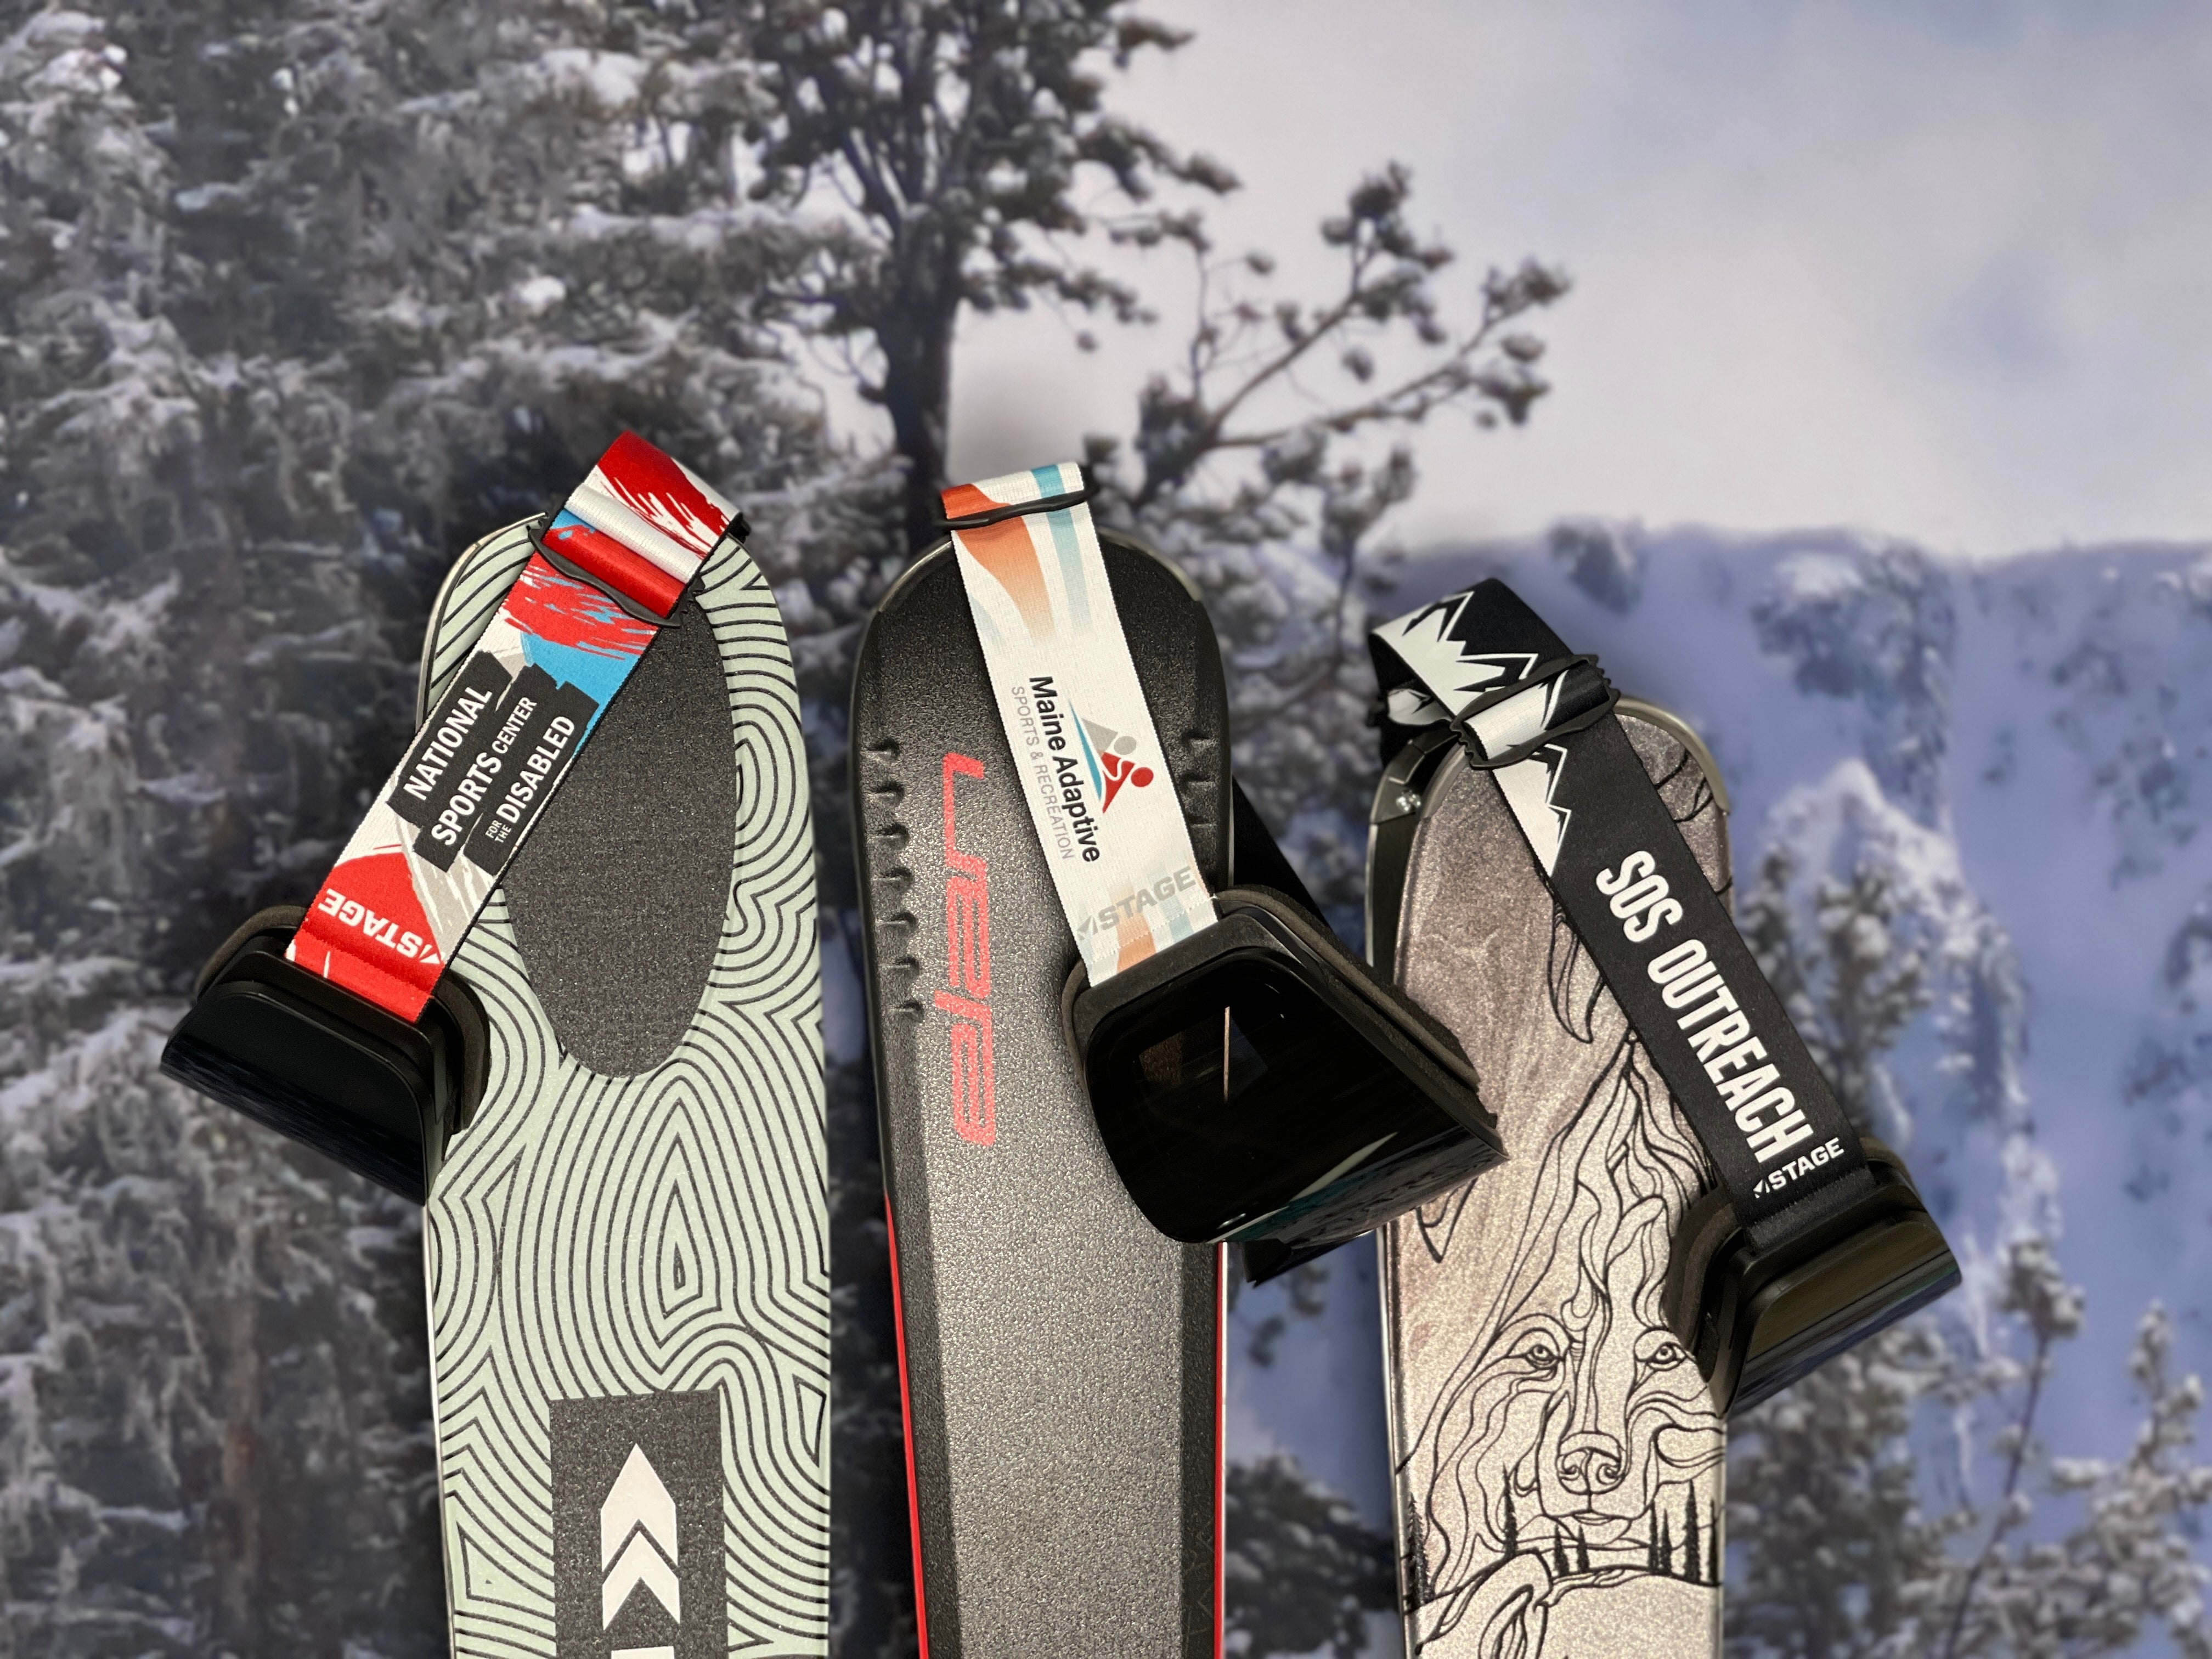 Three ski tails prominently displayed against a snowy forest backdrop. From left to right: a ski with a wavy green and black pattern and a red and white strap saying "NATIONAL SPORTS CENTER FOR THE DISABLED", a grey ski with "Maine Adaptive" printed along the side and a green and white strap, and a black ski featuring a white line drawing of a face with a black strap labeled "SOS OUTREACH". All straps have the "STAGE" logo